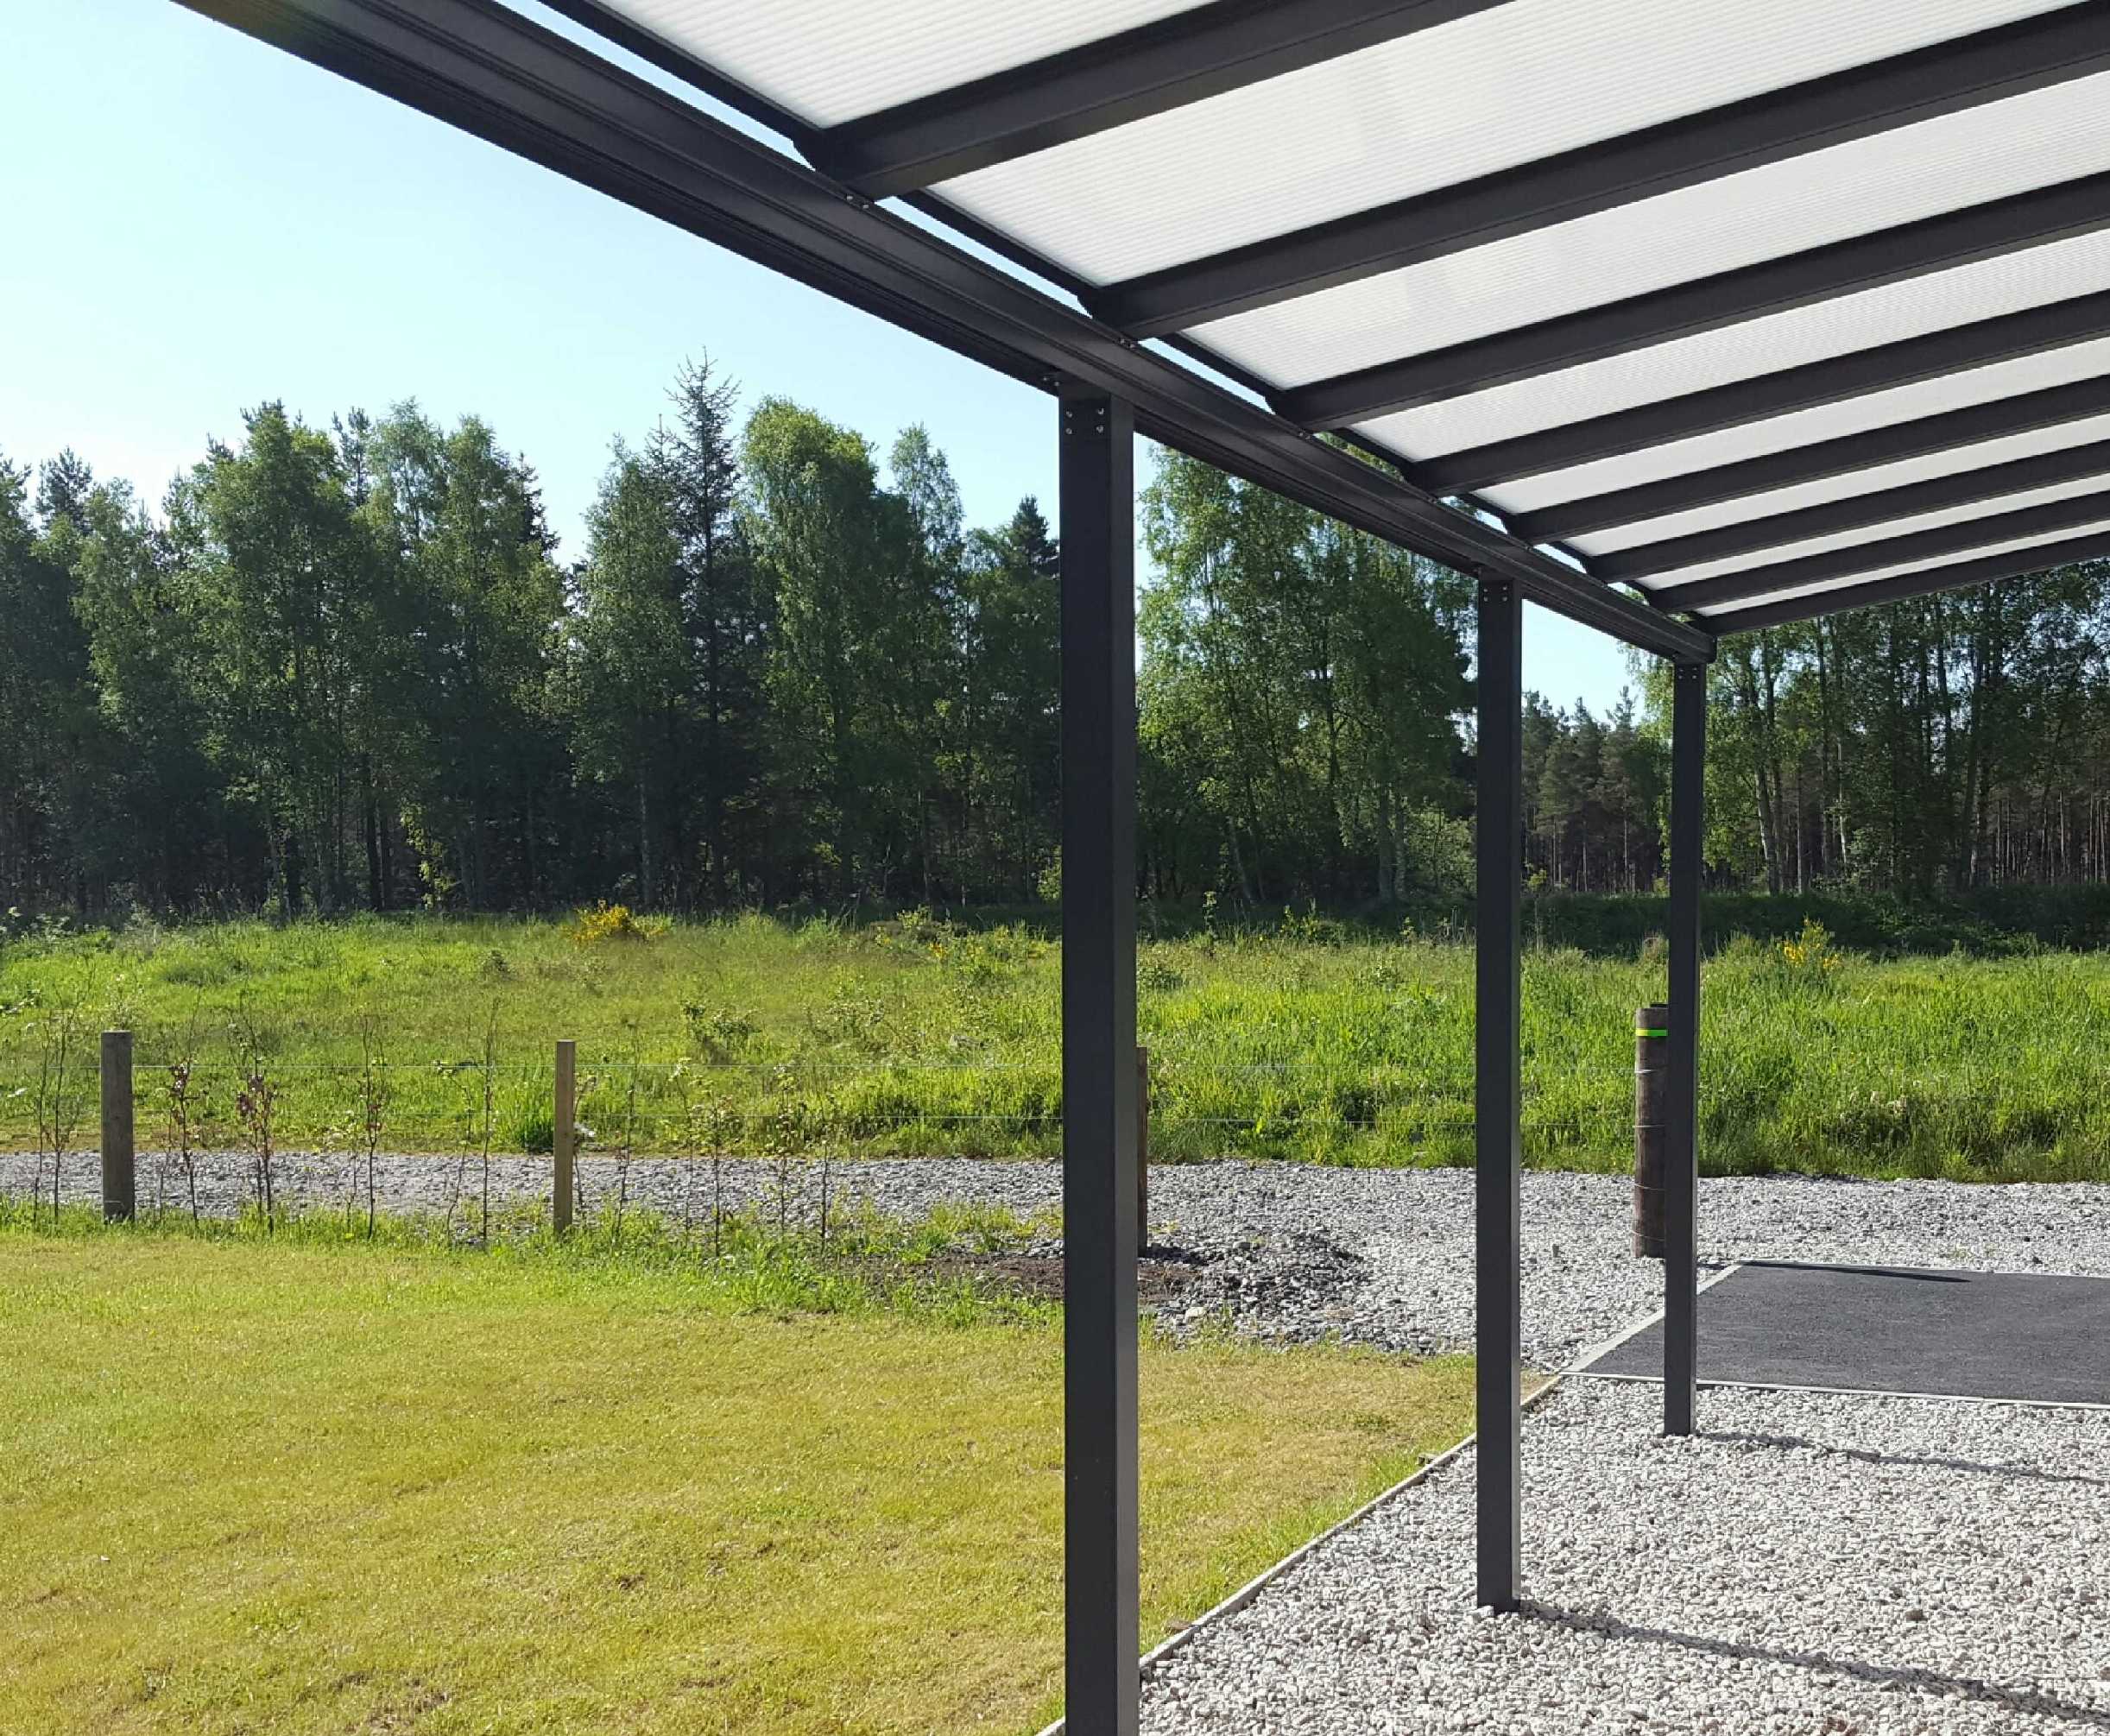 Omega Smart Lean-To Canopy, Anthracite Grey, 6mm Glass Clear Plate Polycarbonate Glazing - 8.4m (W) x 4.0m (P), (4) Supporting Posts